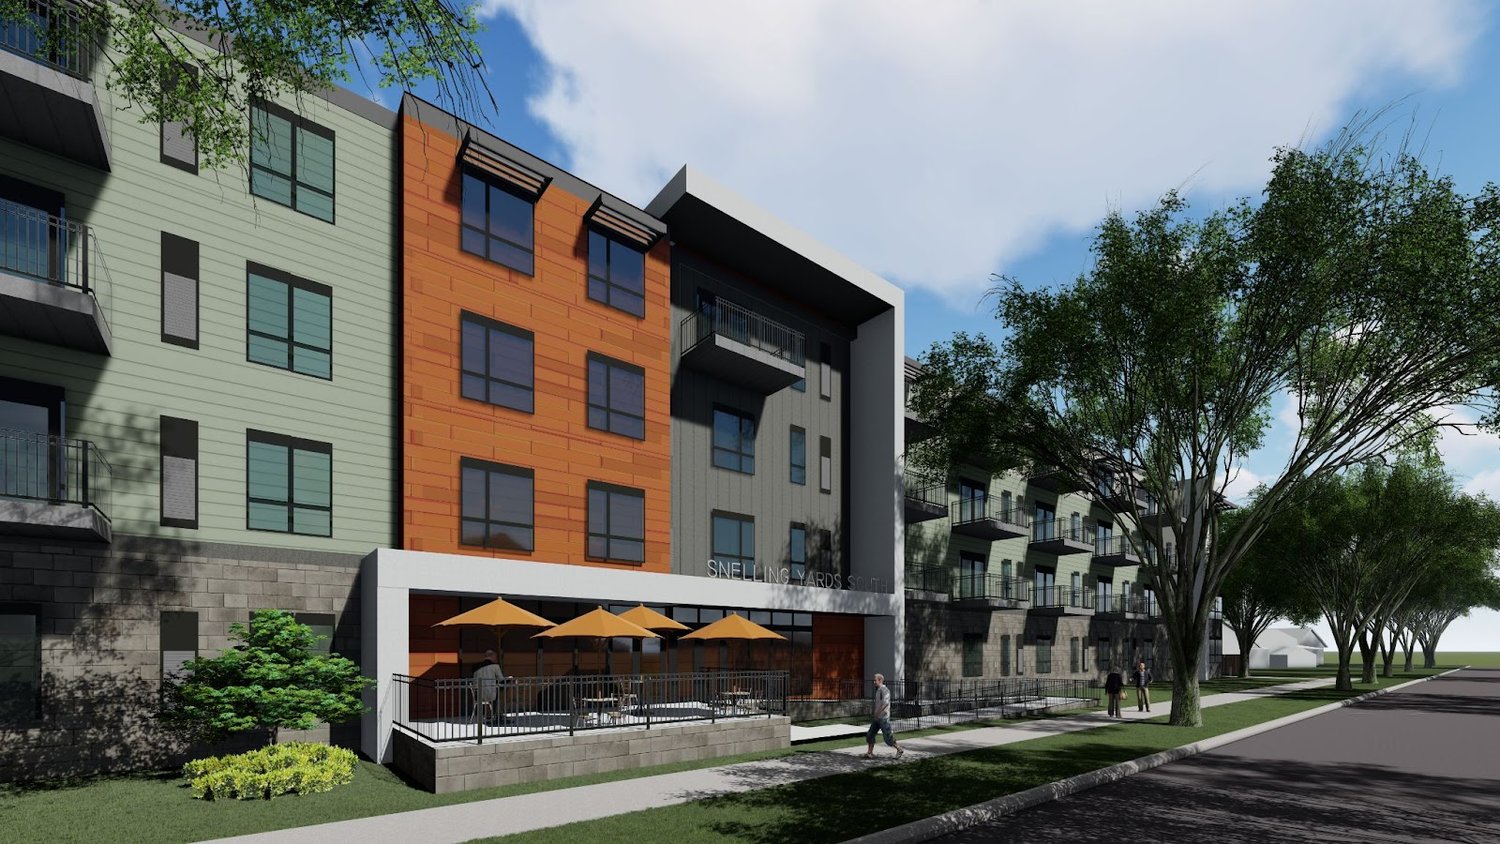 Ecumen is constructing a 100-unit senior housing community that will include 11 units designated for veterans who are experiencing homelessness.